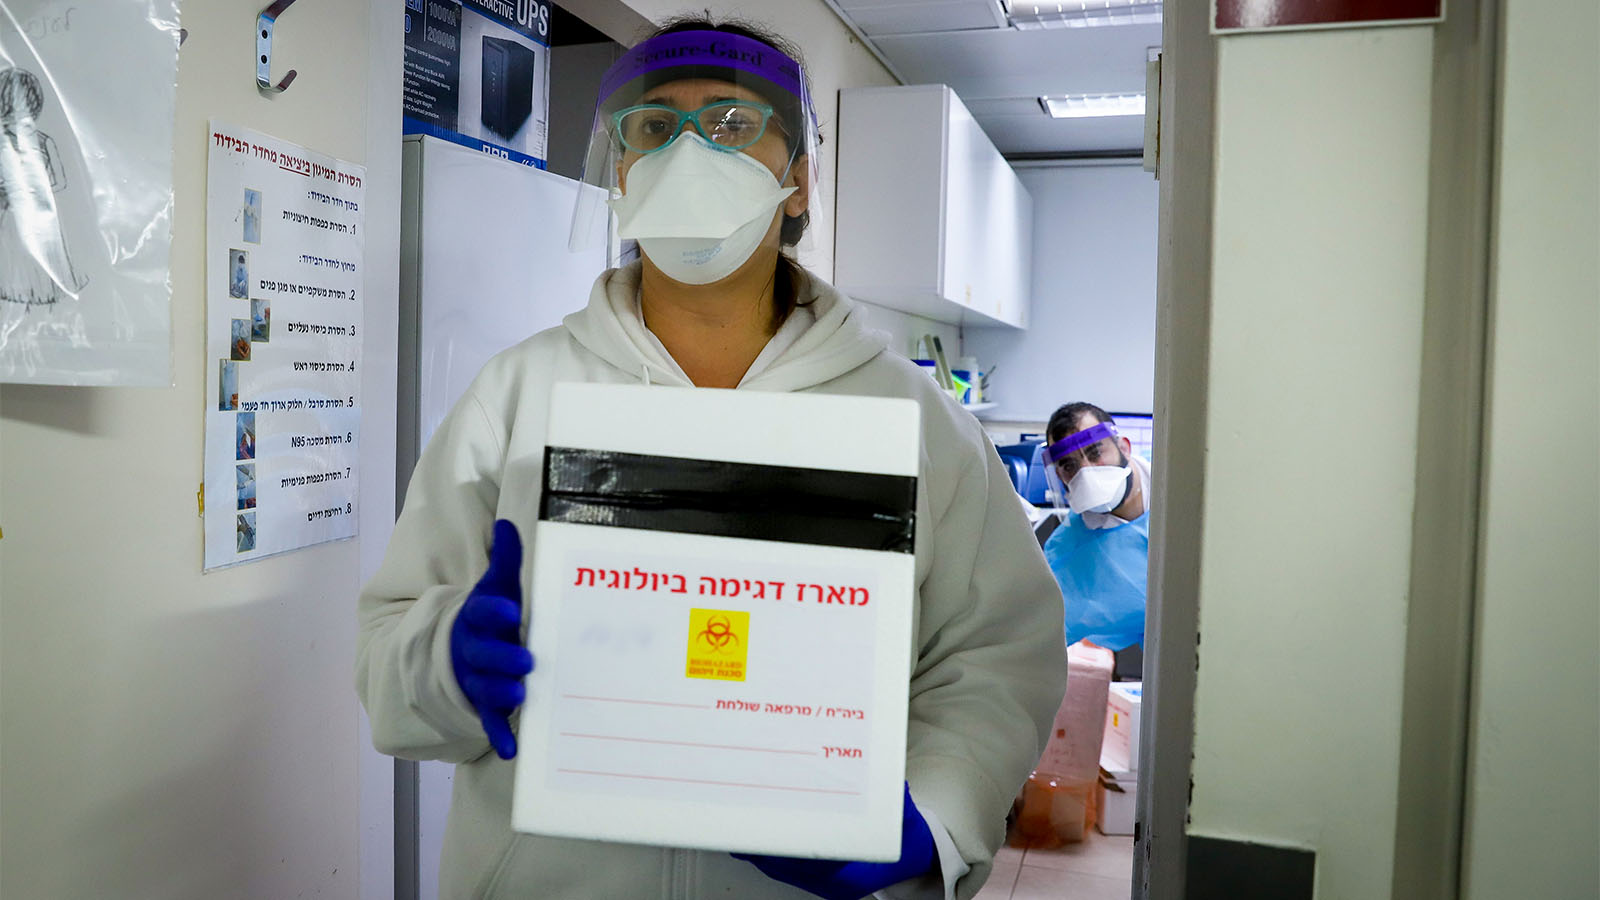 A sample from a patient suspected of COVID-19 is tested at a laboratory. (Photo: Yosi Aloni/Flash90)